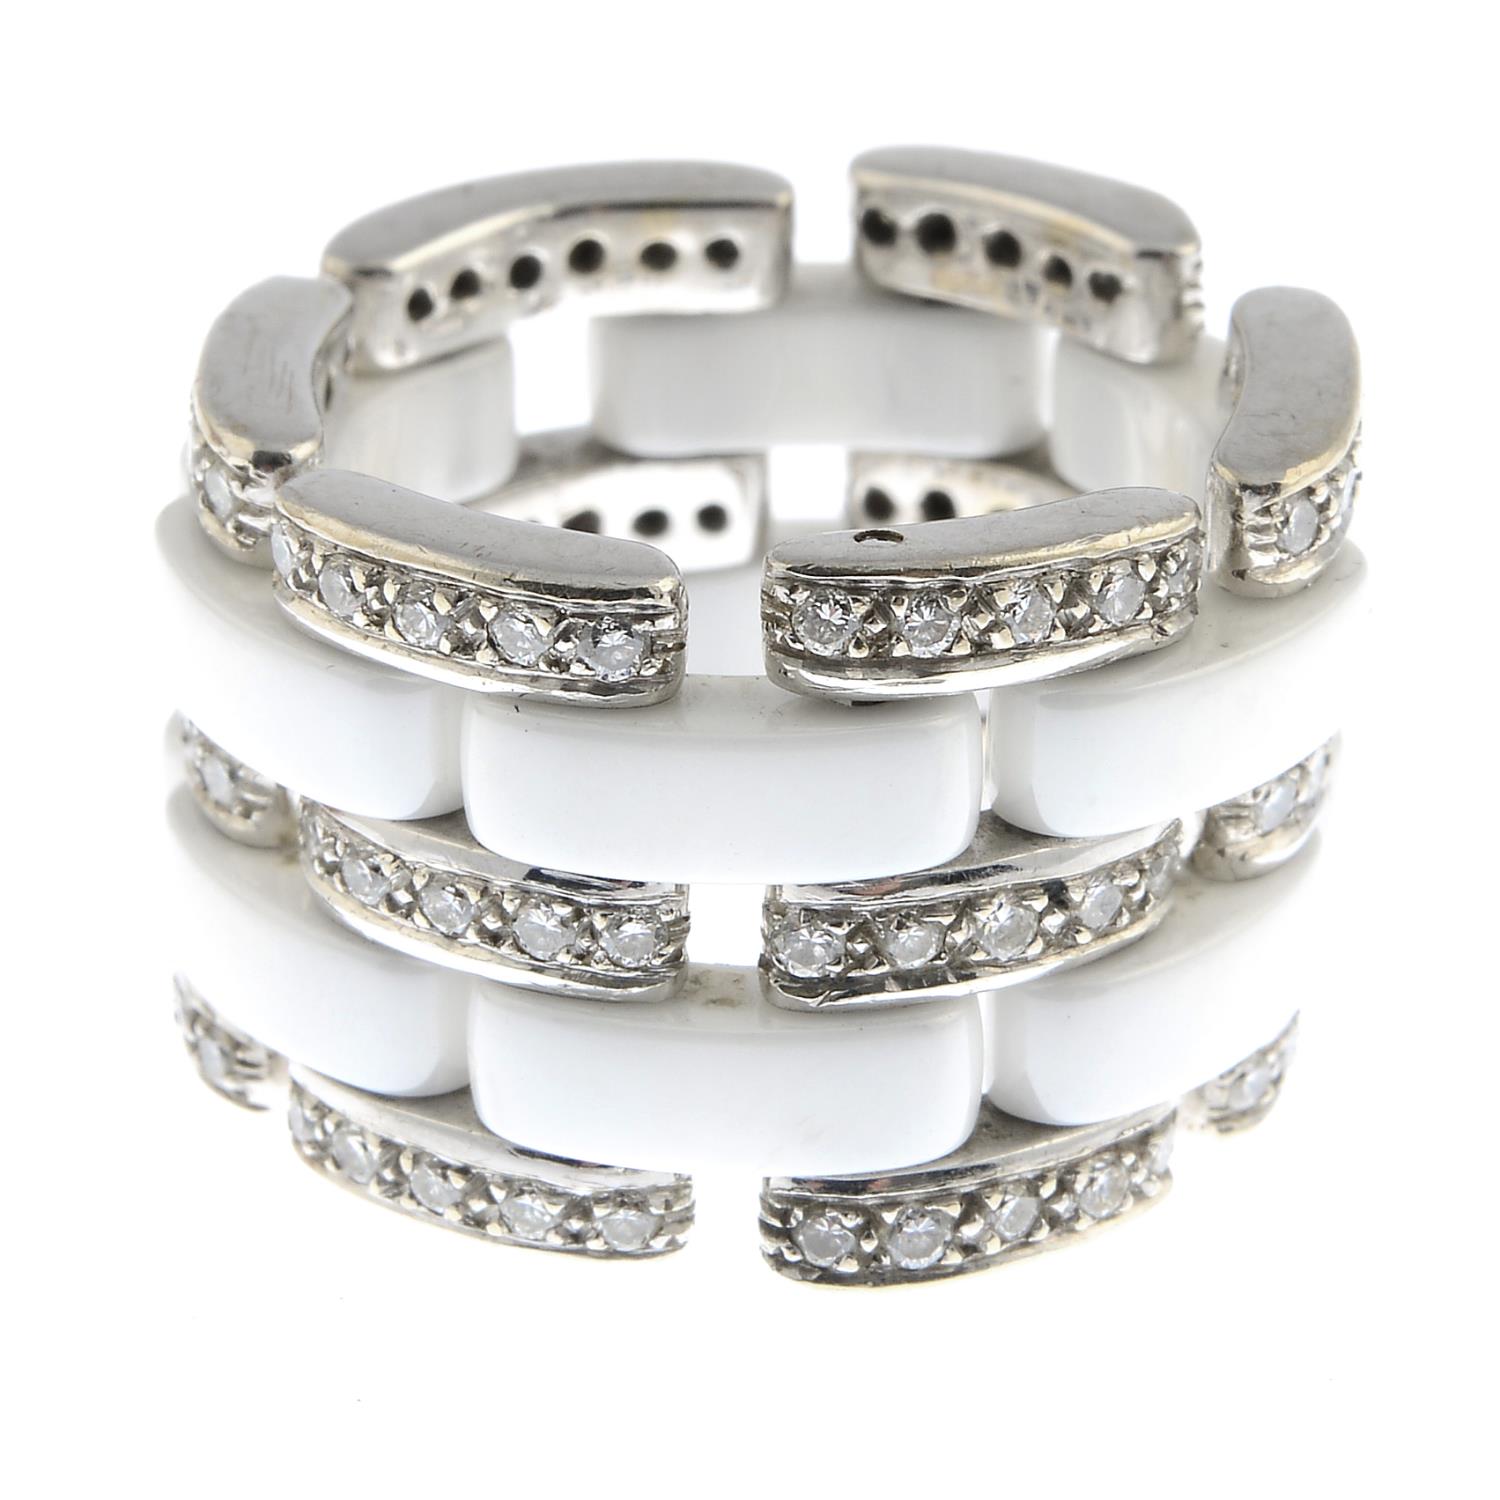 Three diamond and ceramic rings and a ceramic bracelet.Estimated total diamond weight 2.50 to - Image 3 of 3